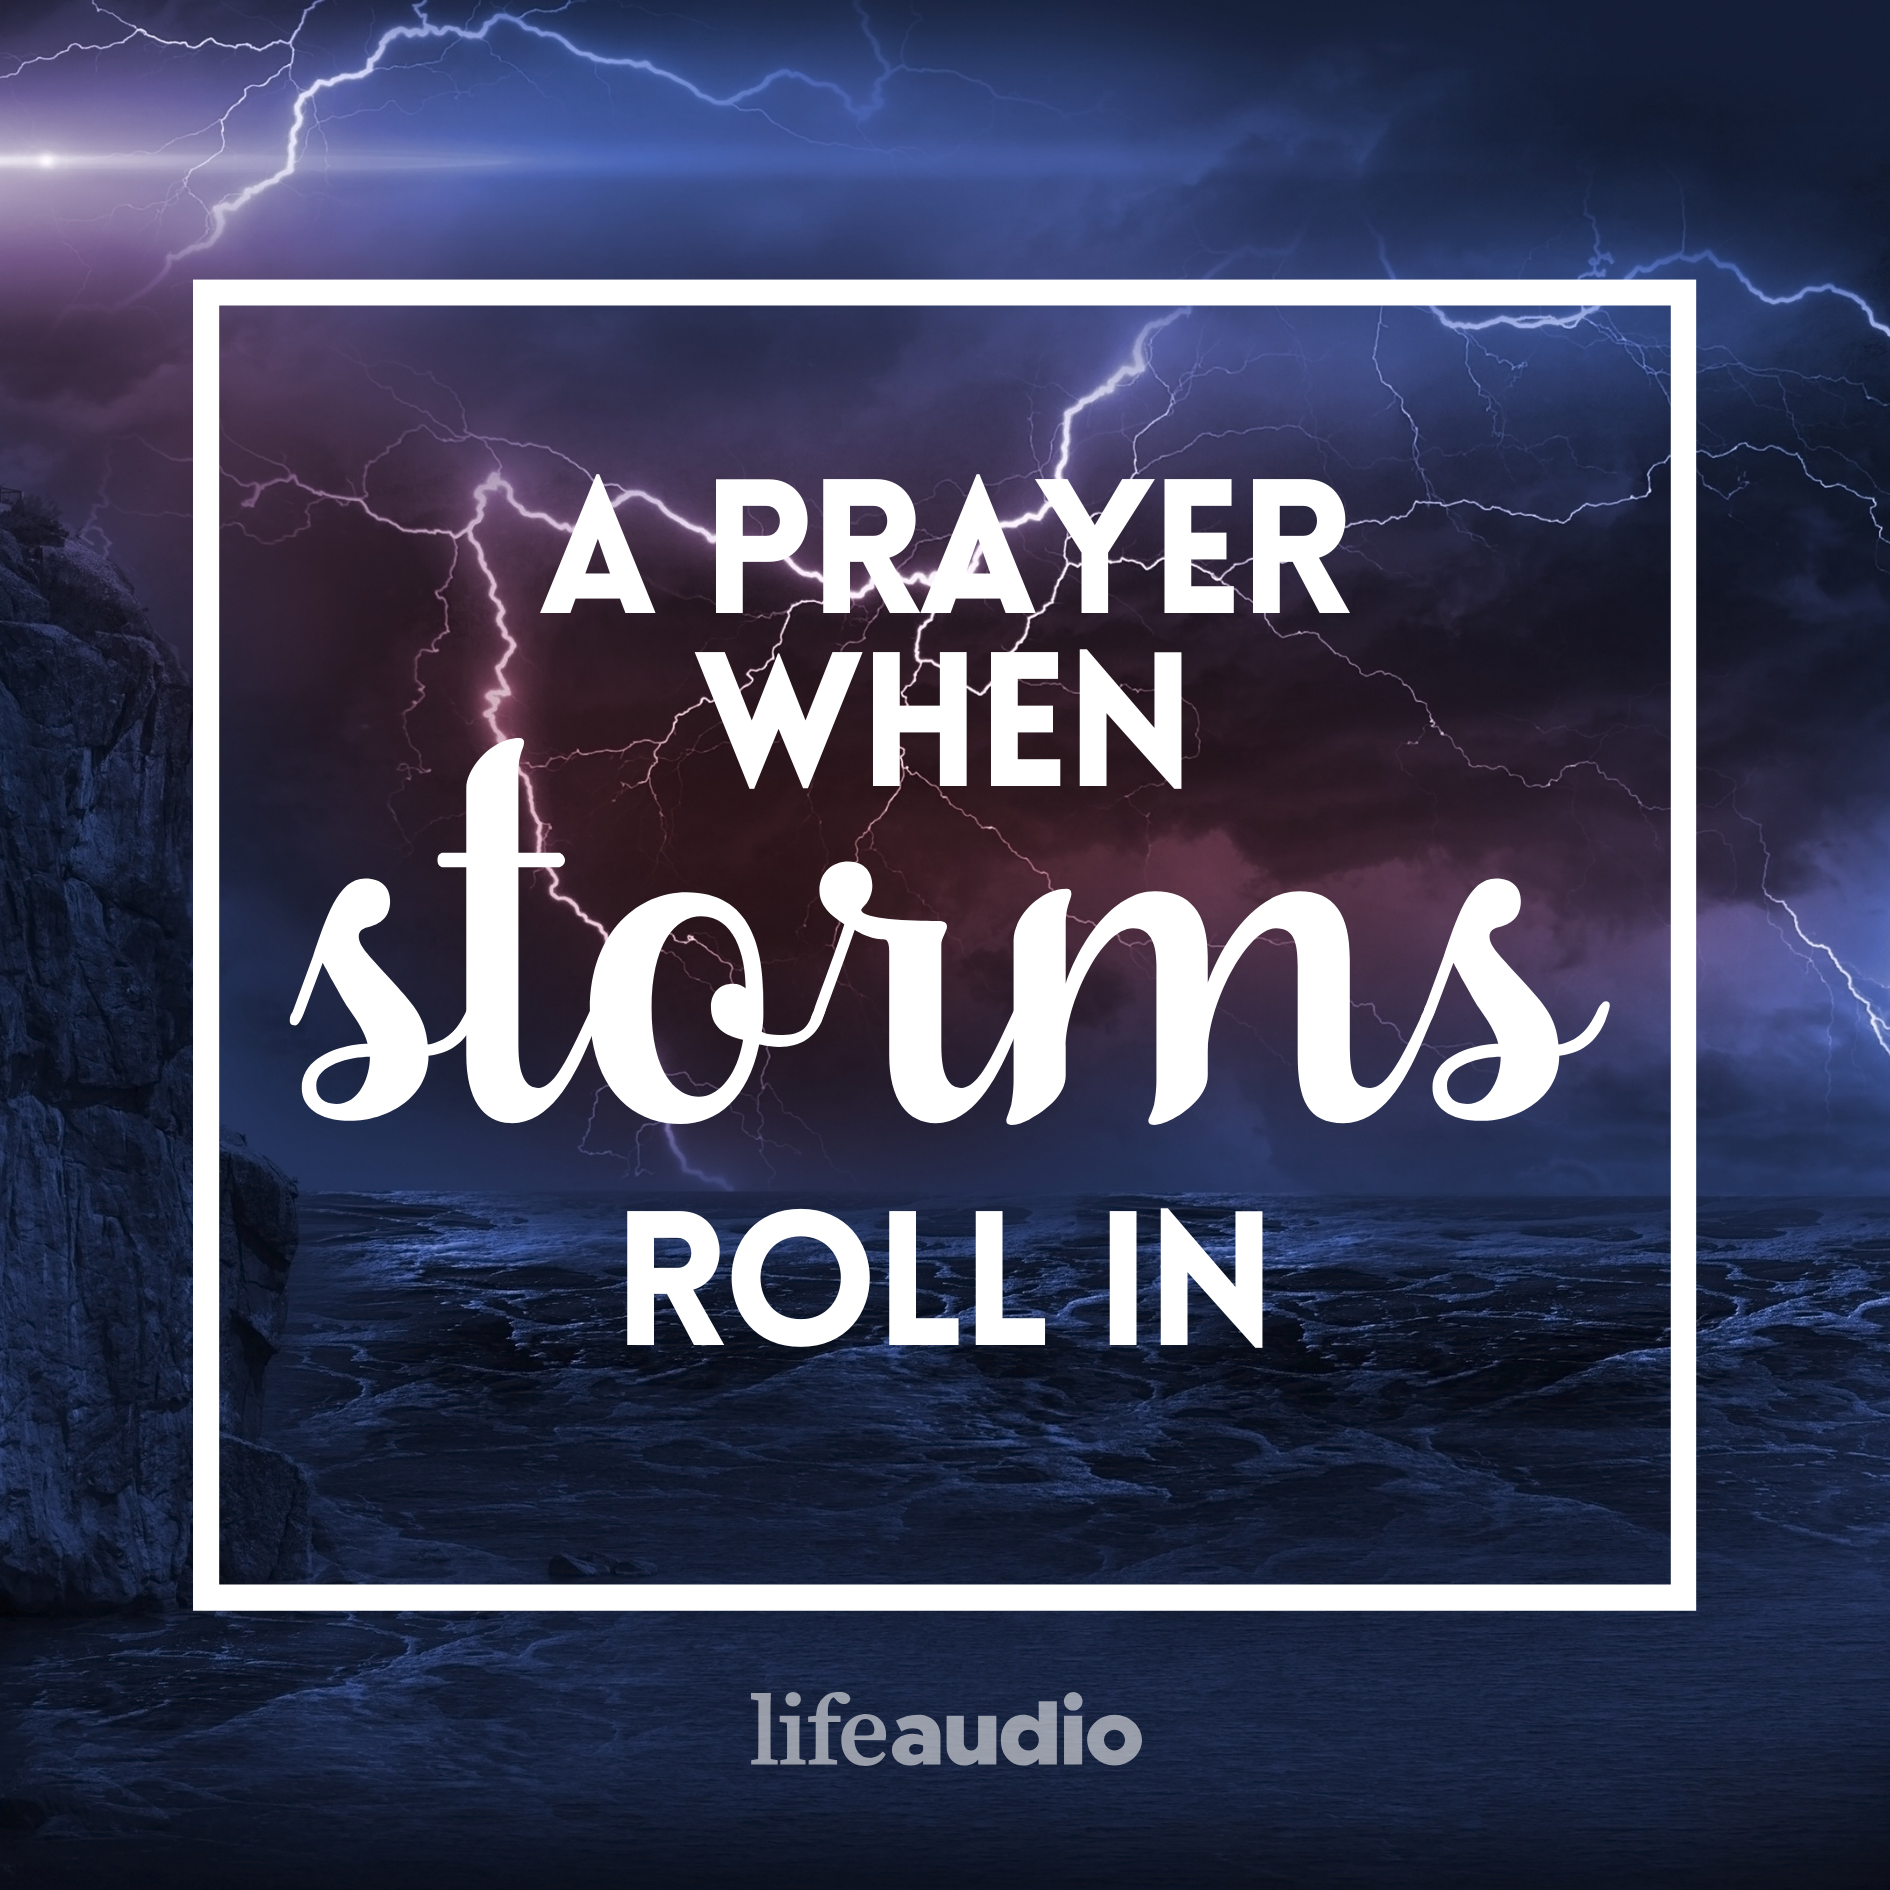 A Prayer When Storms Roll In